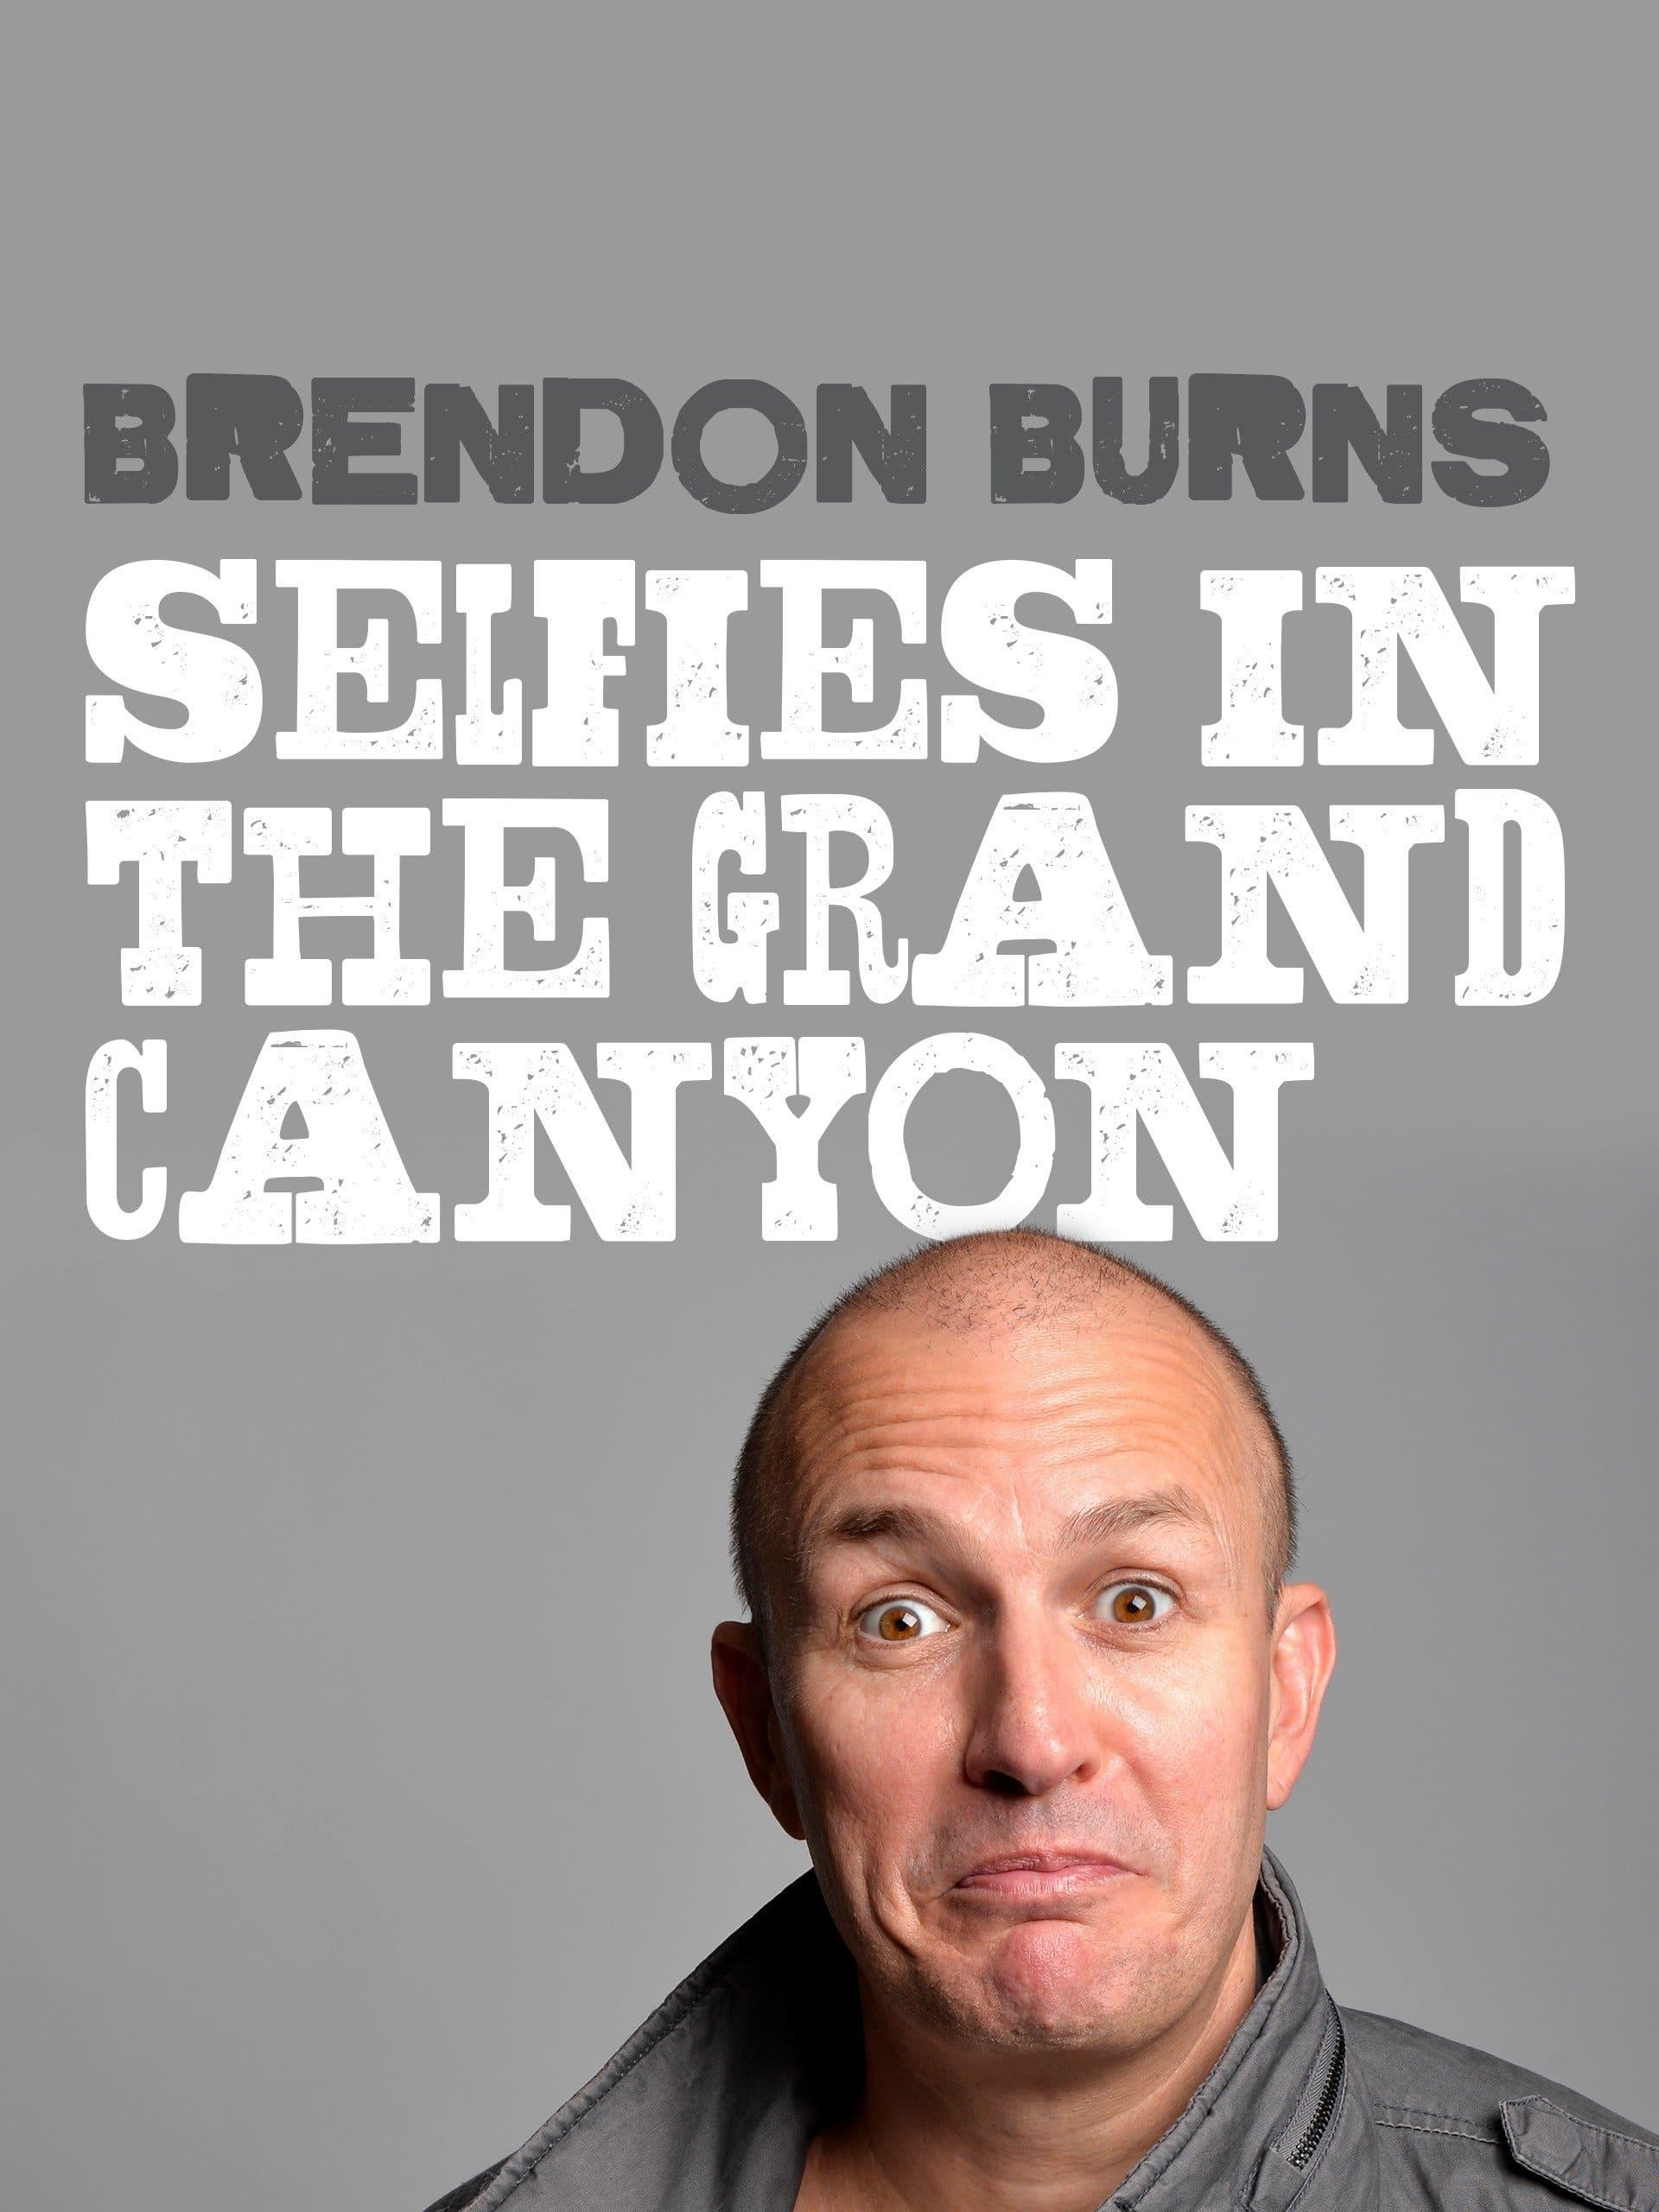 Brendon Burns: Selfies in the Grand Canyon poster